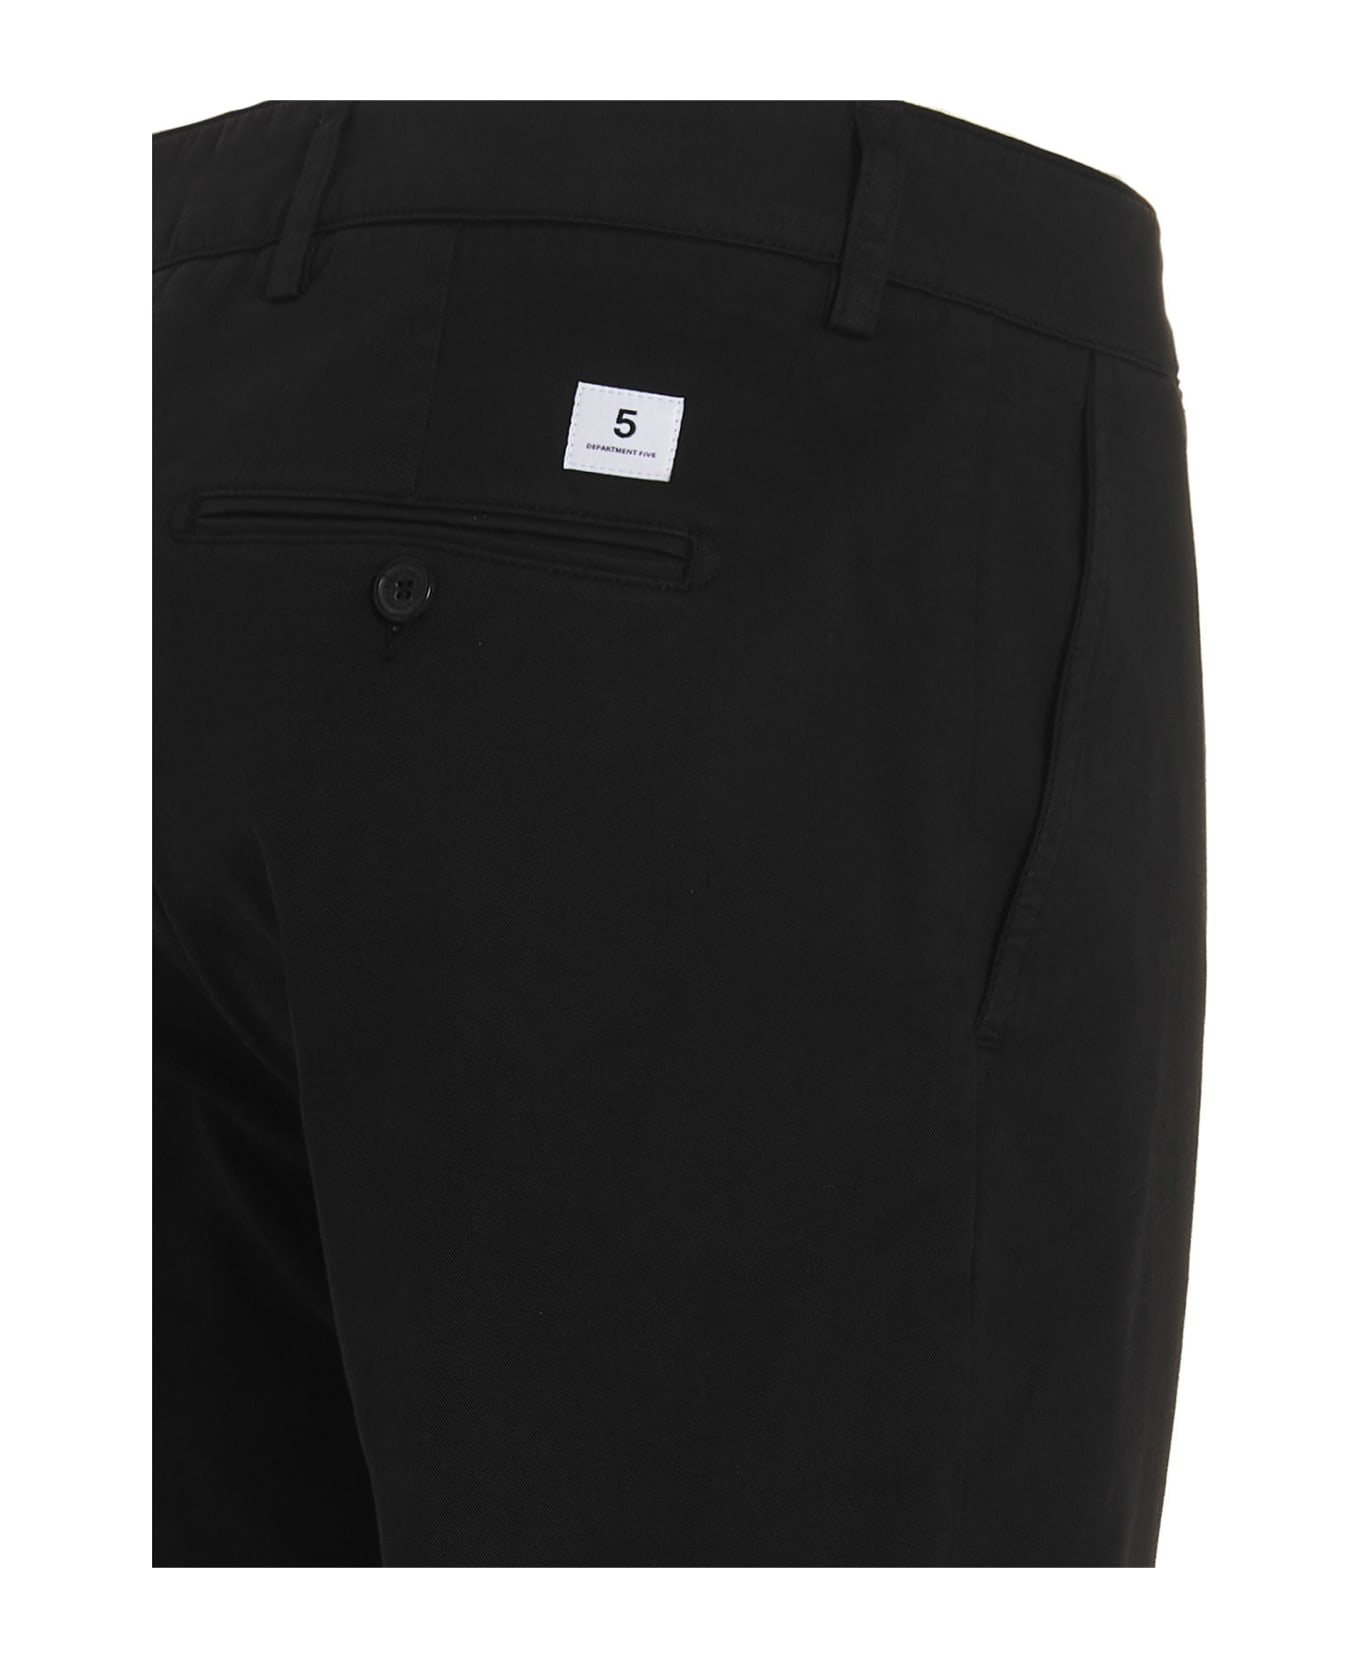 Department Five Mike' Trousers - Black   ボトムス